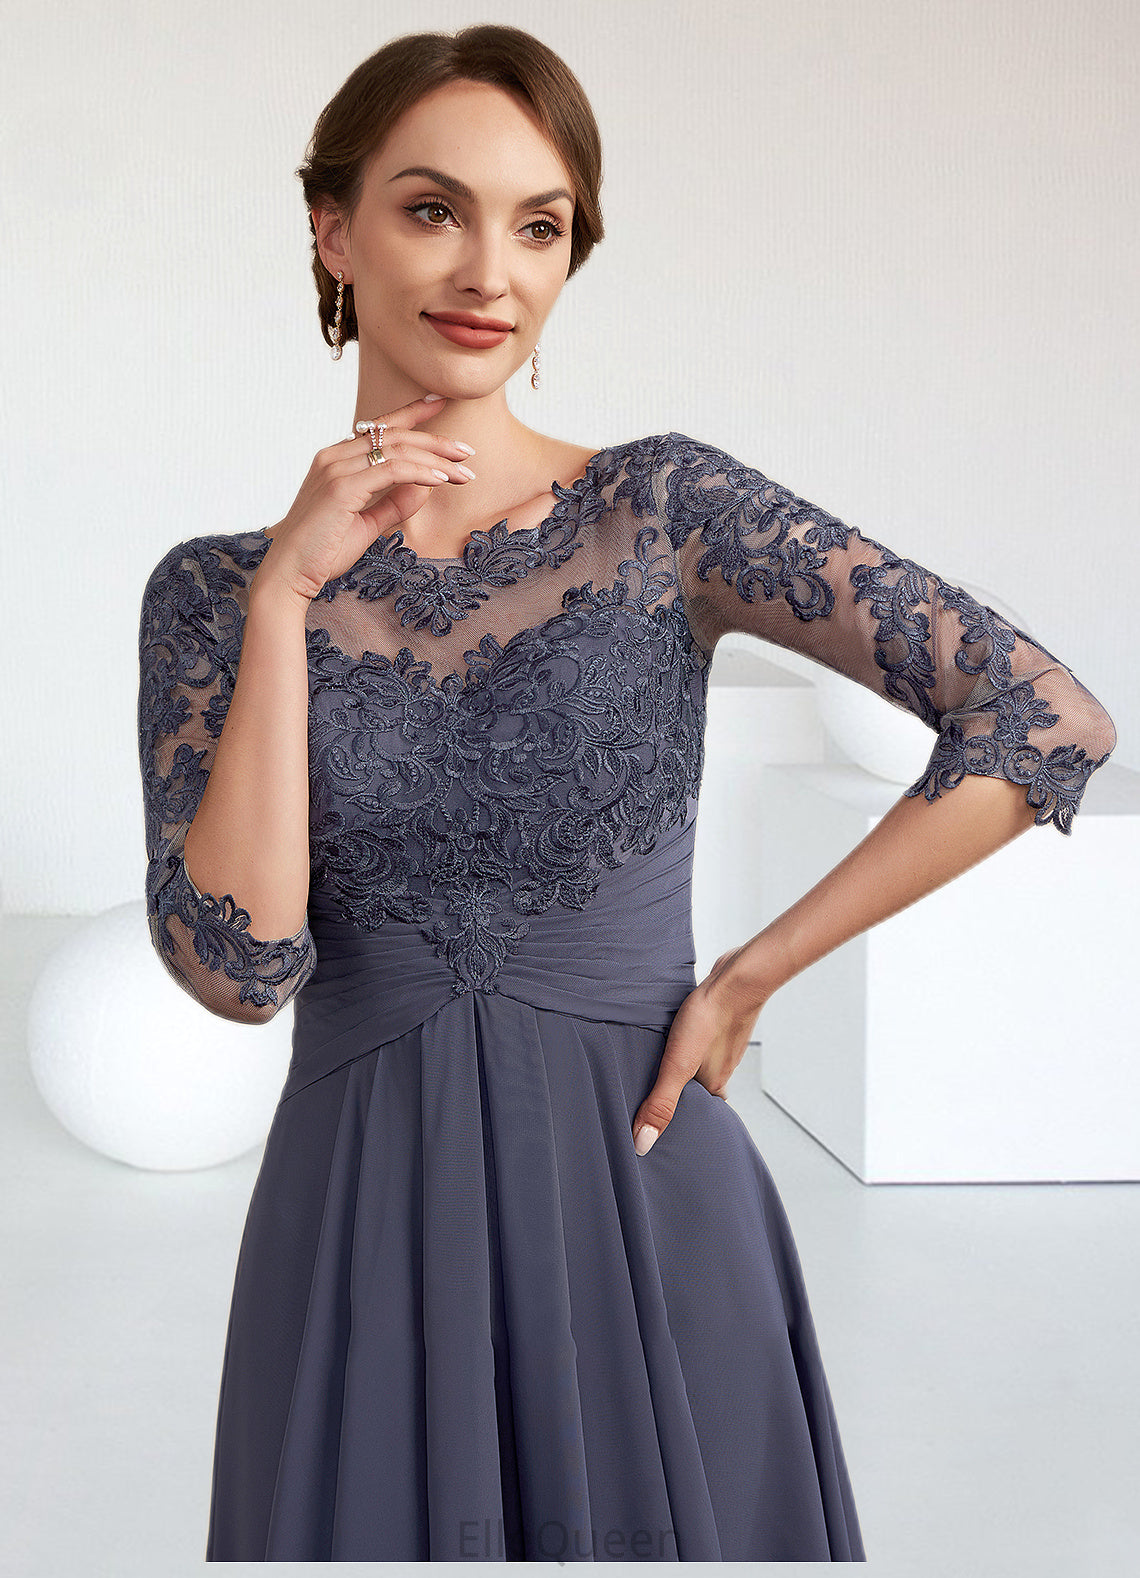 Toni A-Line Scoop Neck Asymmetrical Chiffon Lace Mother of the Bride Dress With Ruffle DG126P0014531